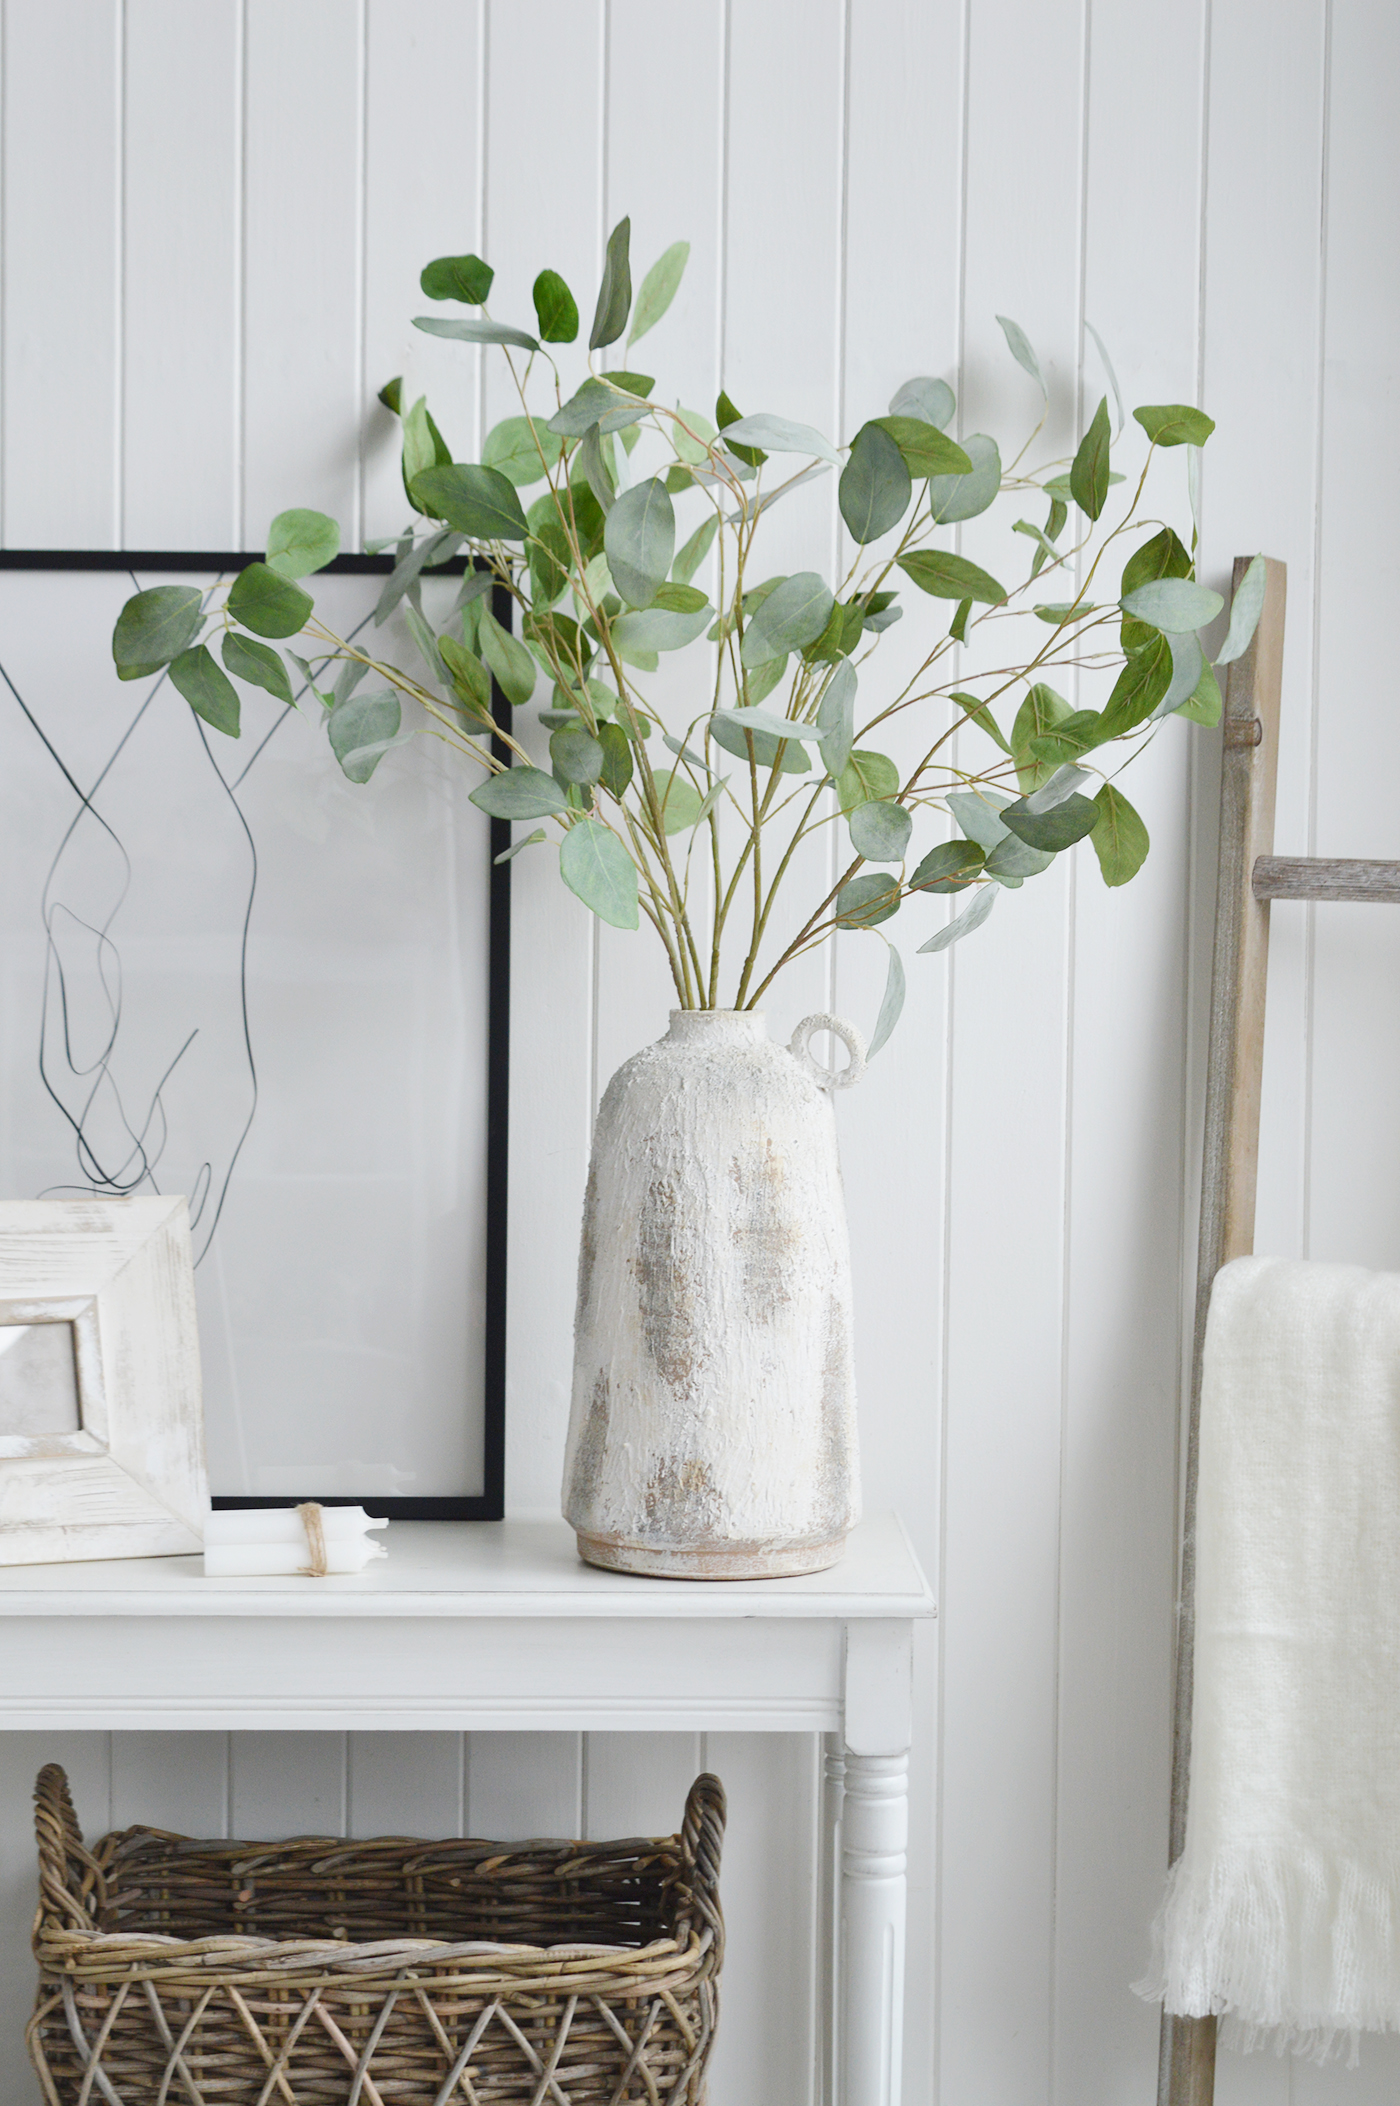 Hamden White Rustic Stone Vase - Console table styling for New England and Hamptons Interiors, New England style furniture and accessories for country, coastal, city and modern farmhouse homes